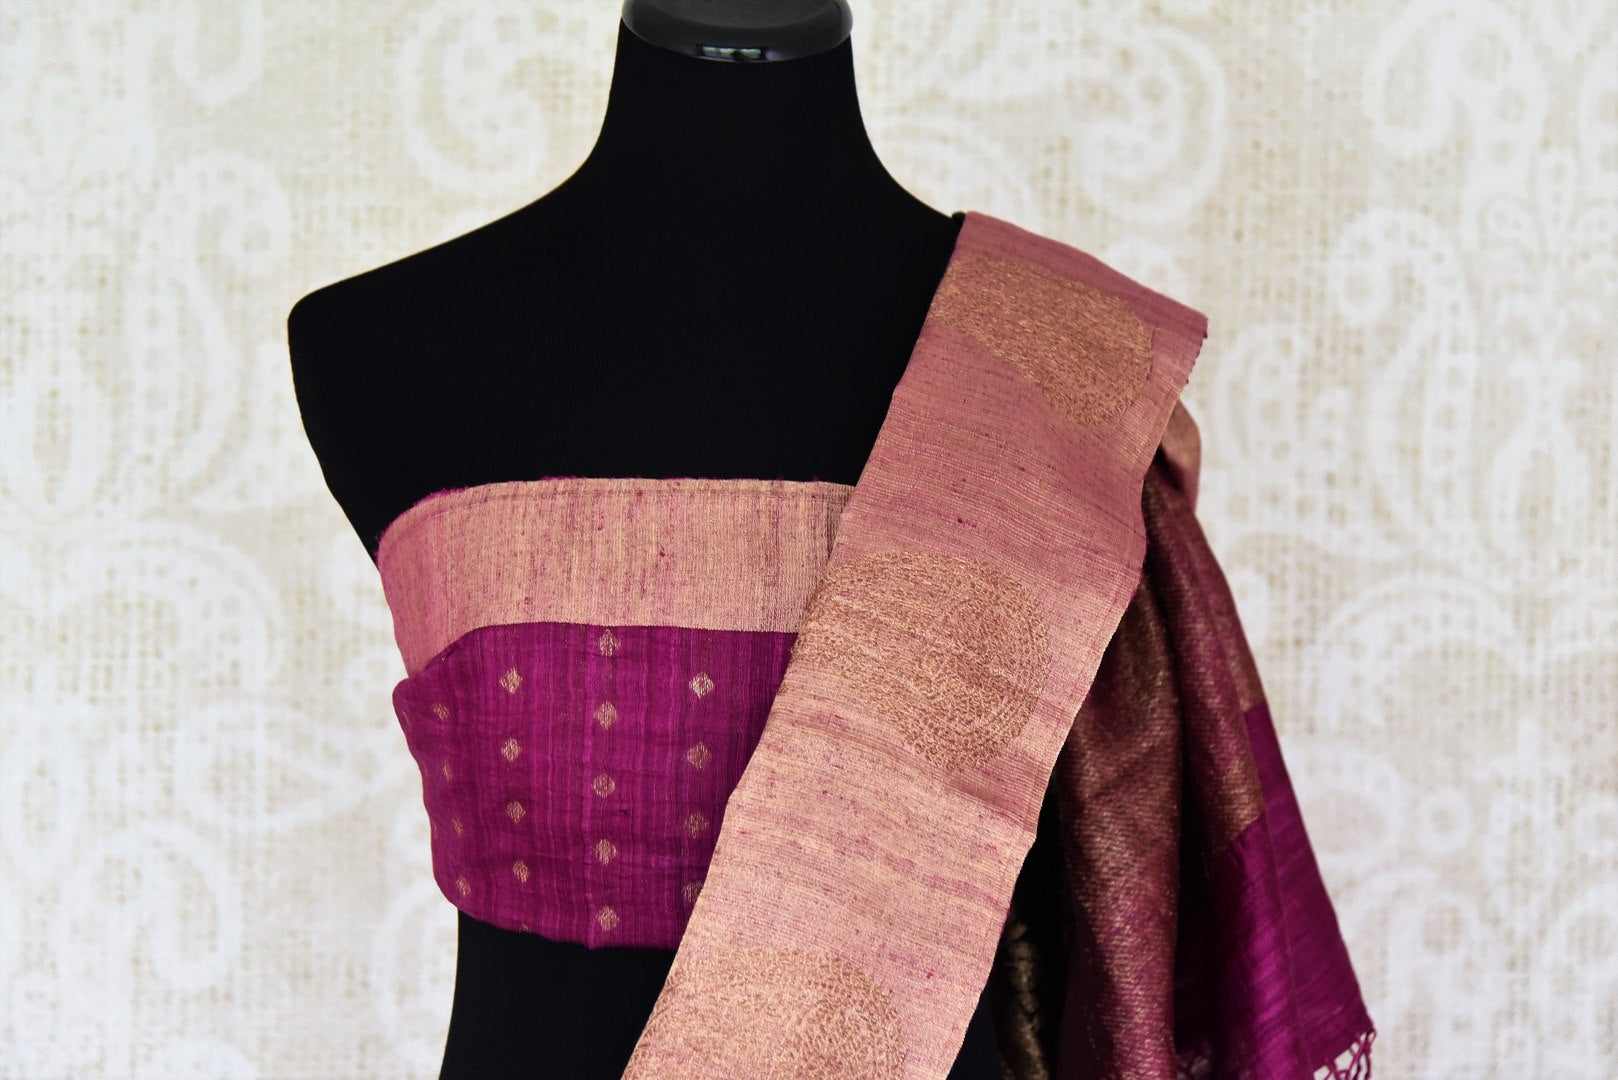 Buy black tussar Benarasi saree online in USA with pink zari border and pallu. Make an elegant ethnic fashion statement at parties, weddings and special occasions with a splendid collection of Indian designer sarees, Banarasi saris, handwoven saris from Pure Elegance Indian clothing store in USA or shop online.-blouse pallu